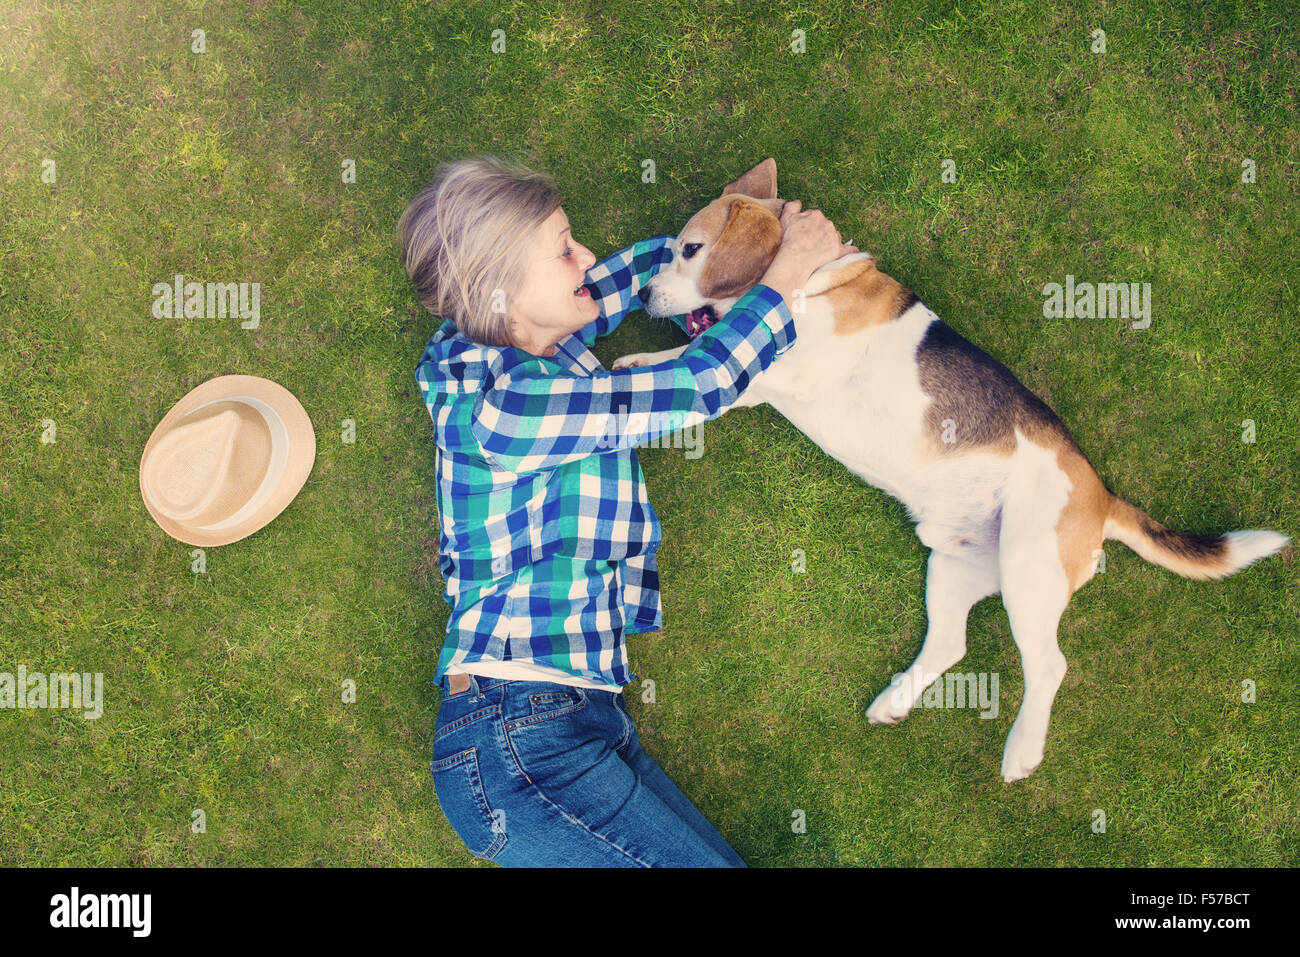 Senior woman with her dog Stock Photo